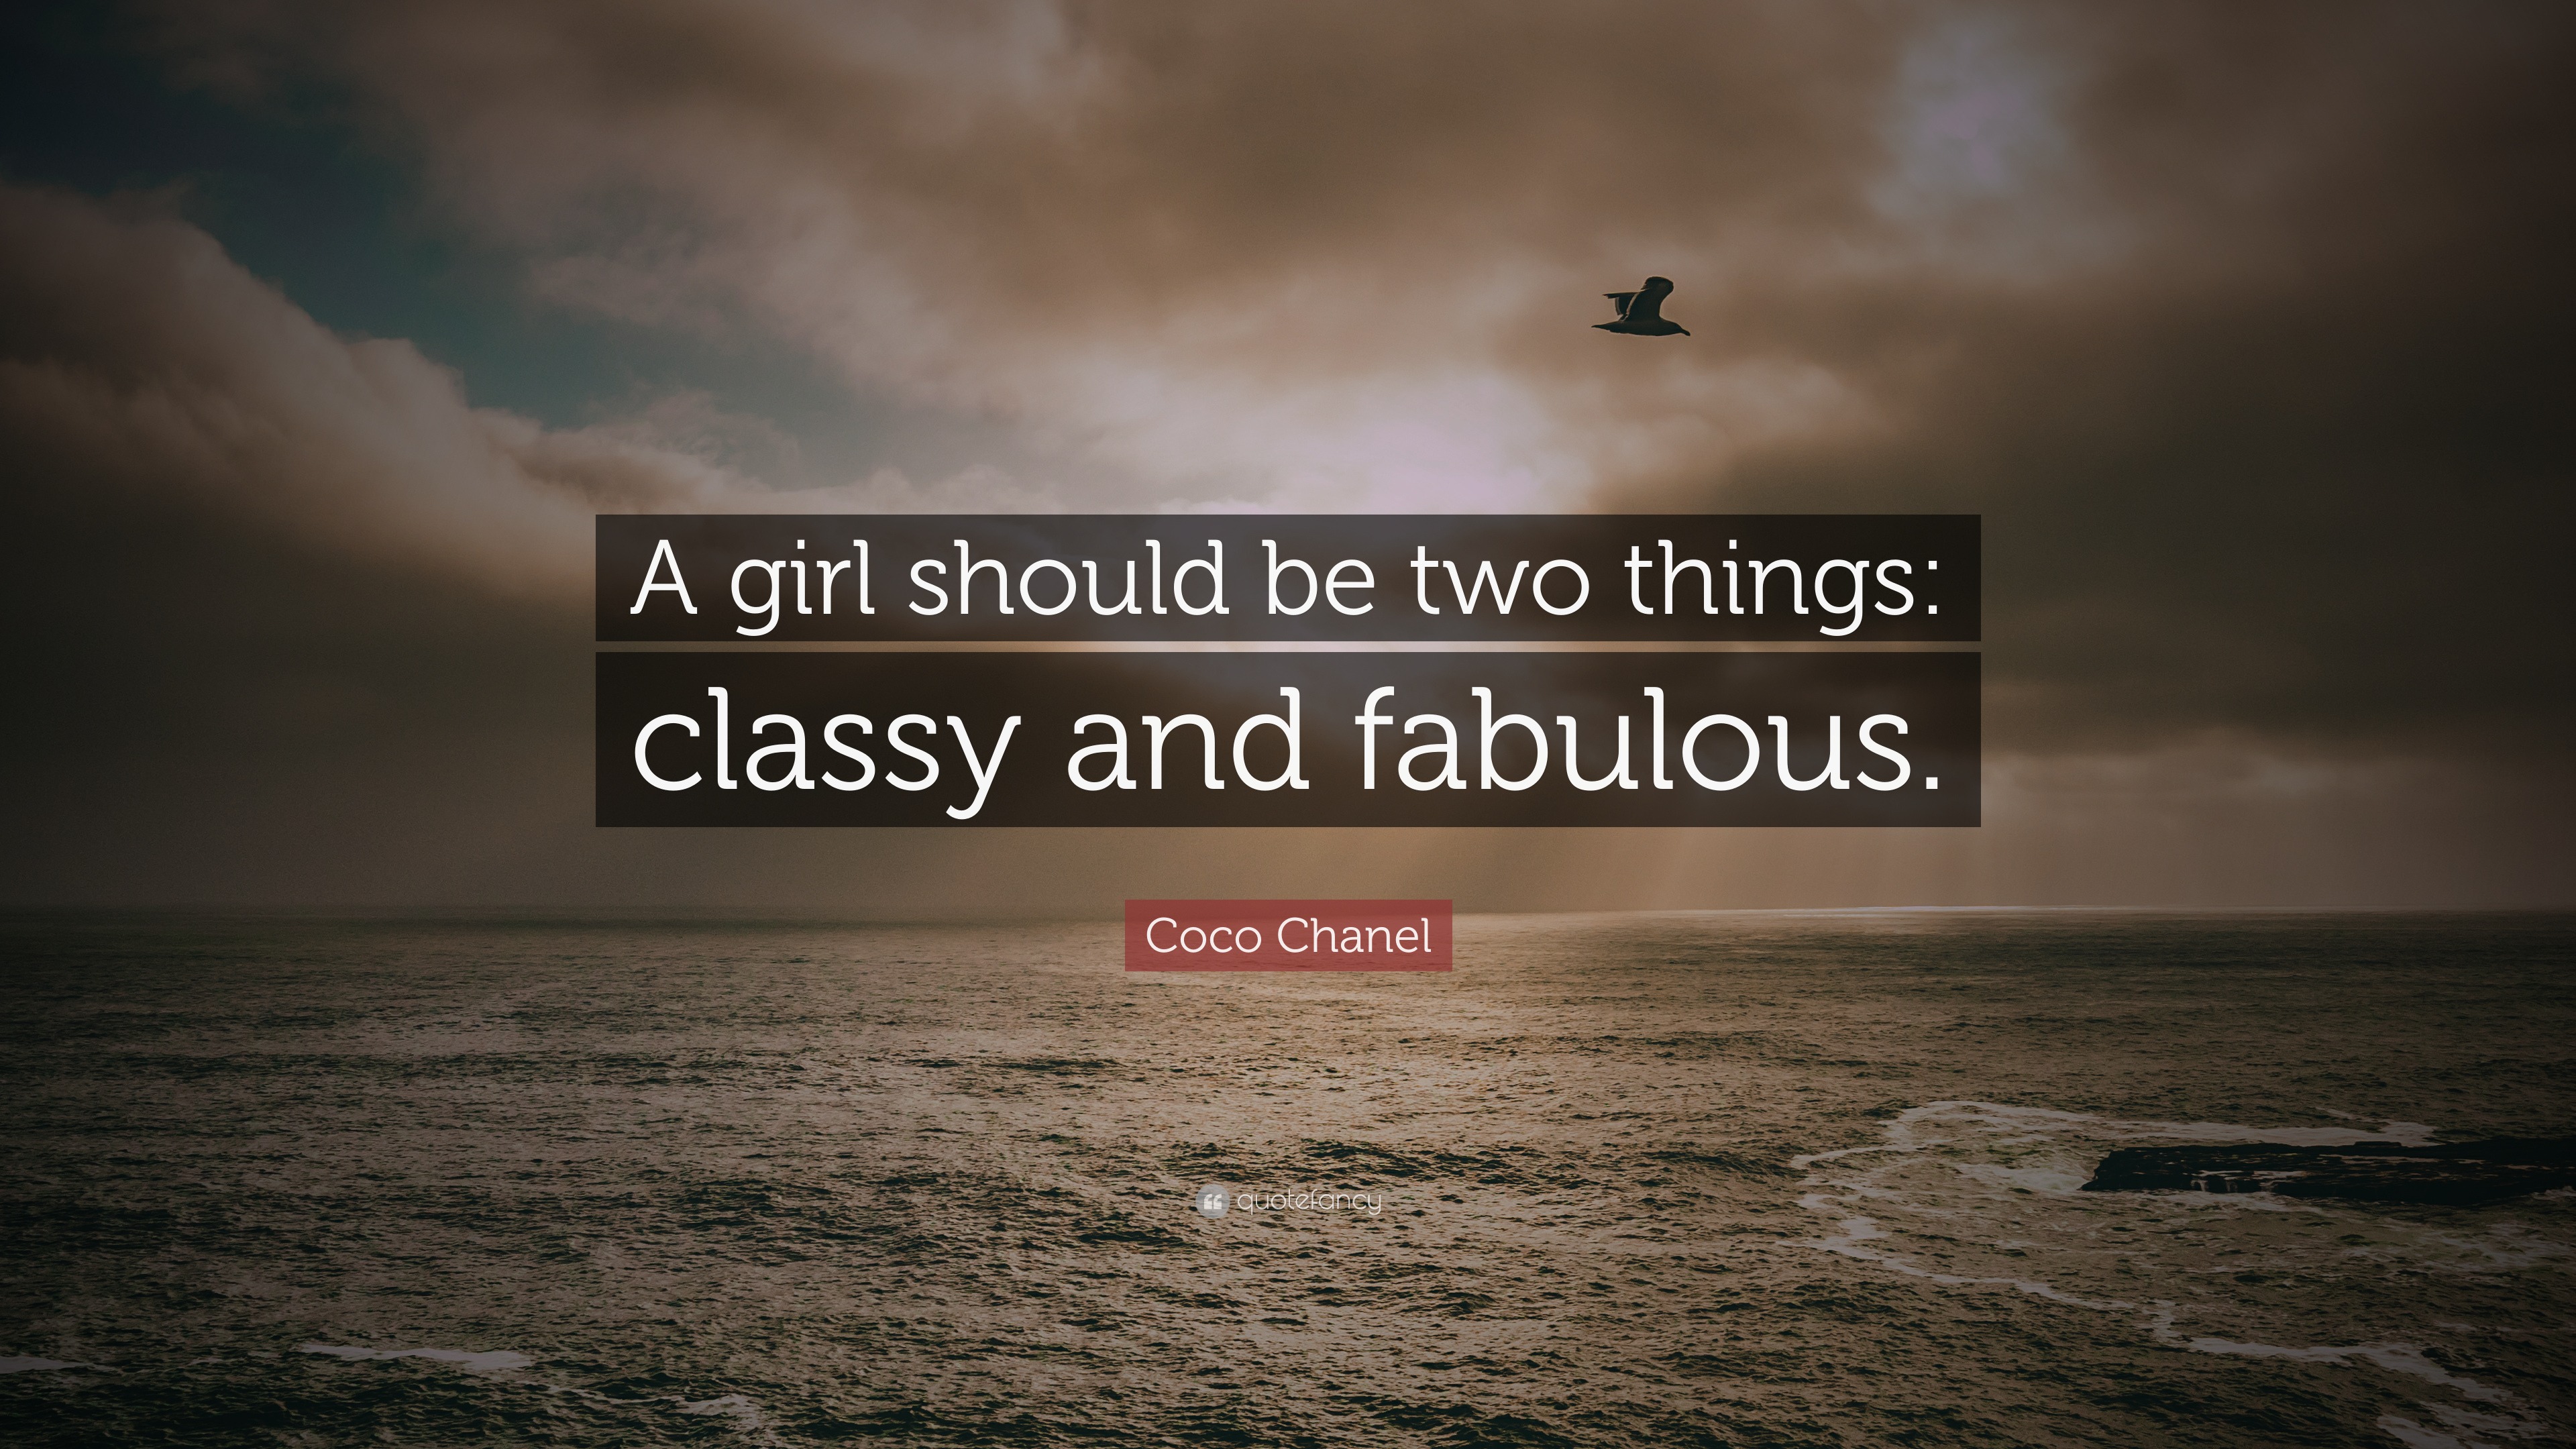 Coco Chanel Quote: “A girl should be two things: classy and fabulous.”